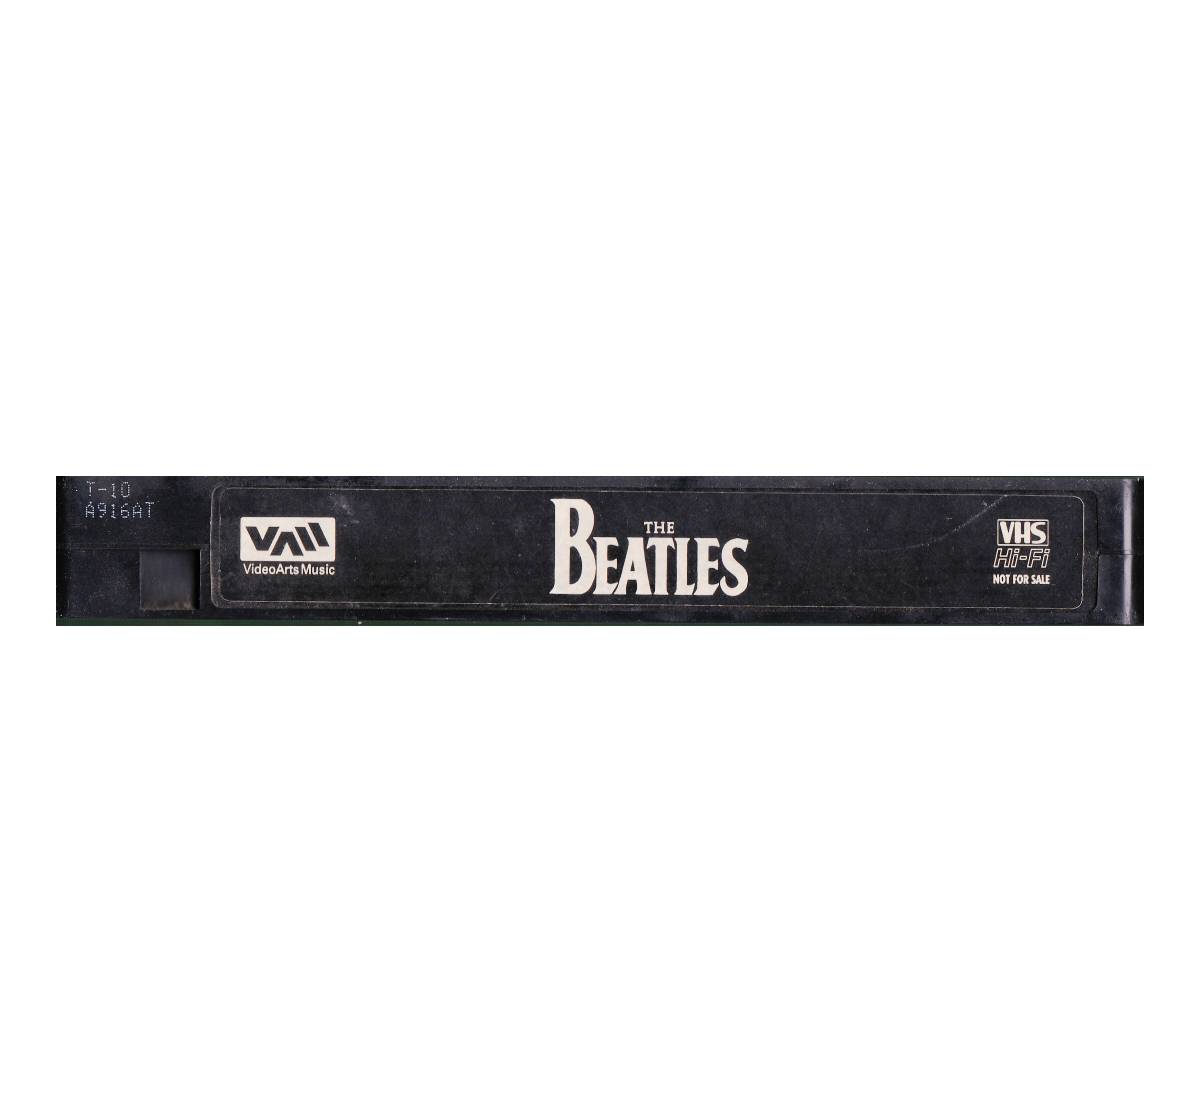 #VHS The Beatles NOT FOR SALE* not for sale 